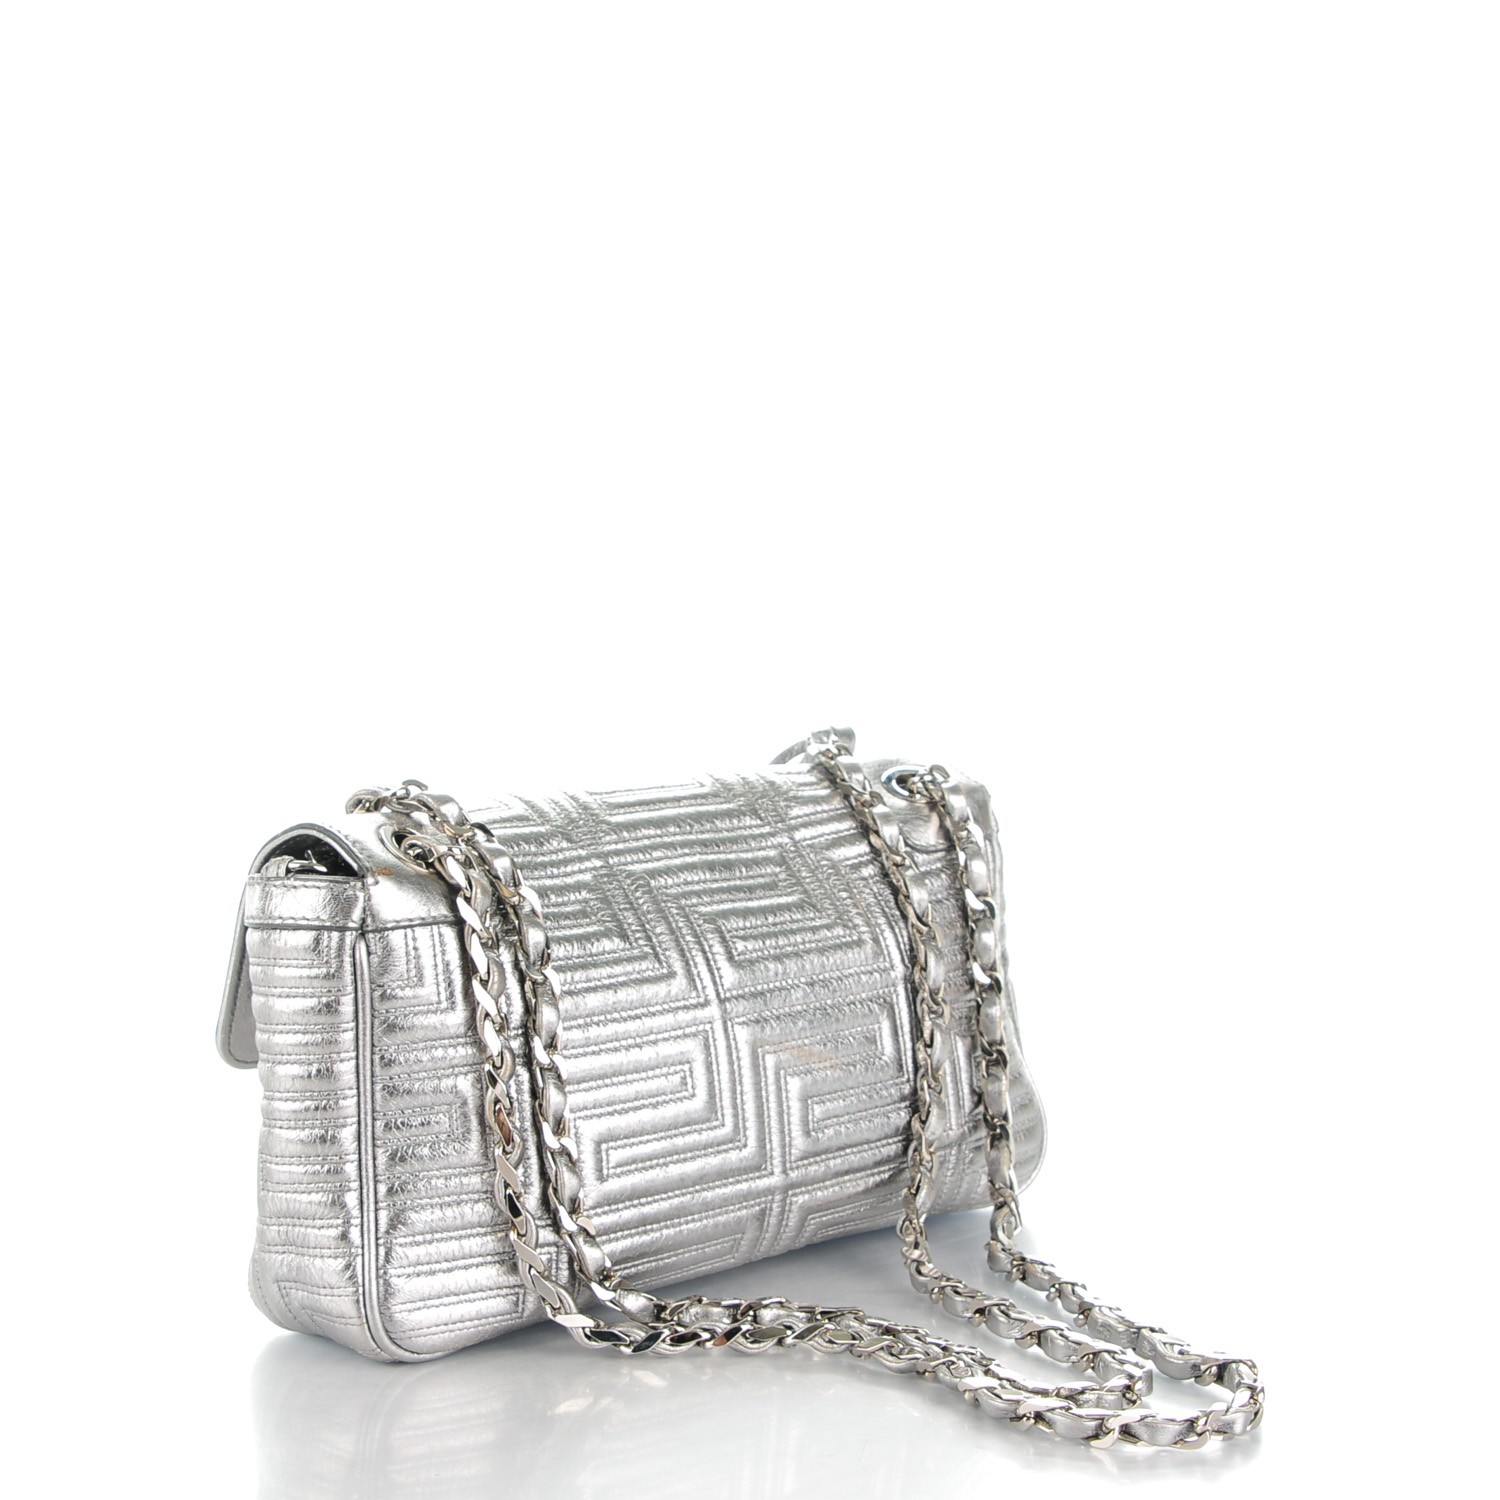 VERSACE Metallic Calfskin Quilted Couture Shoulder Bag Silver 150388